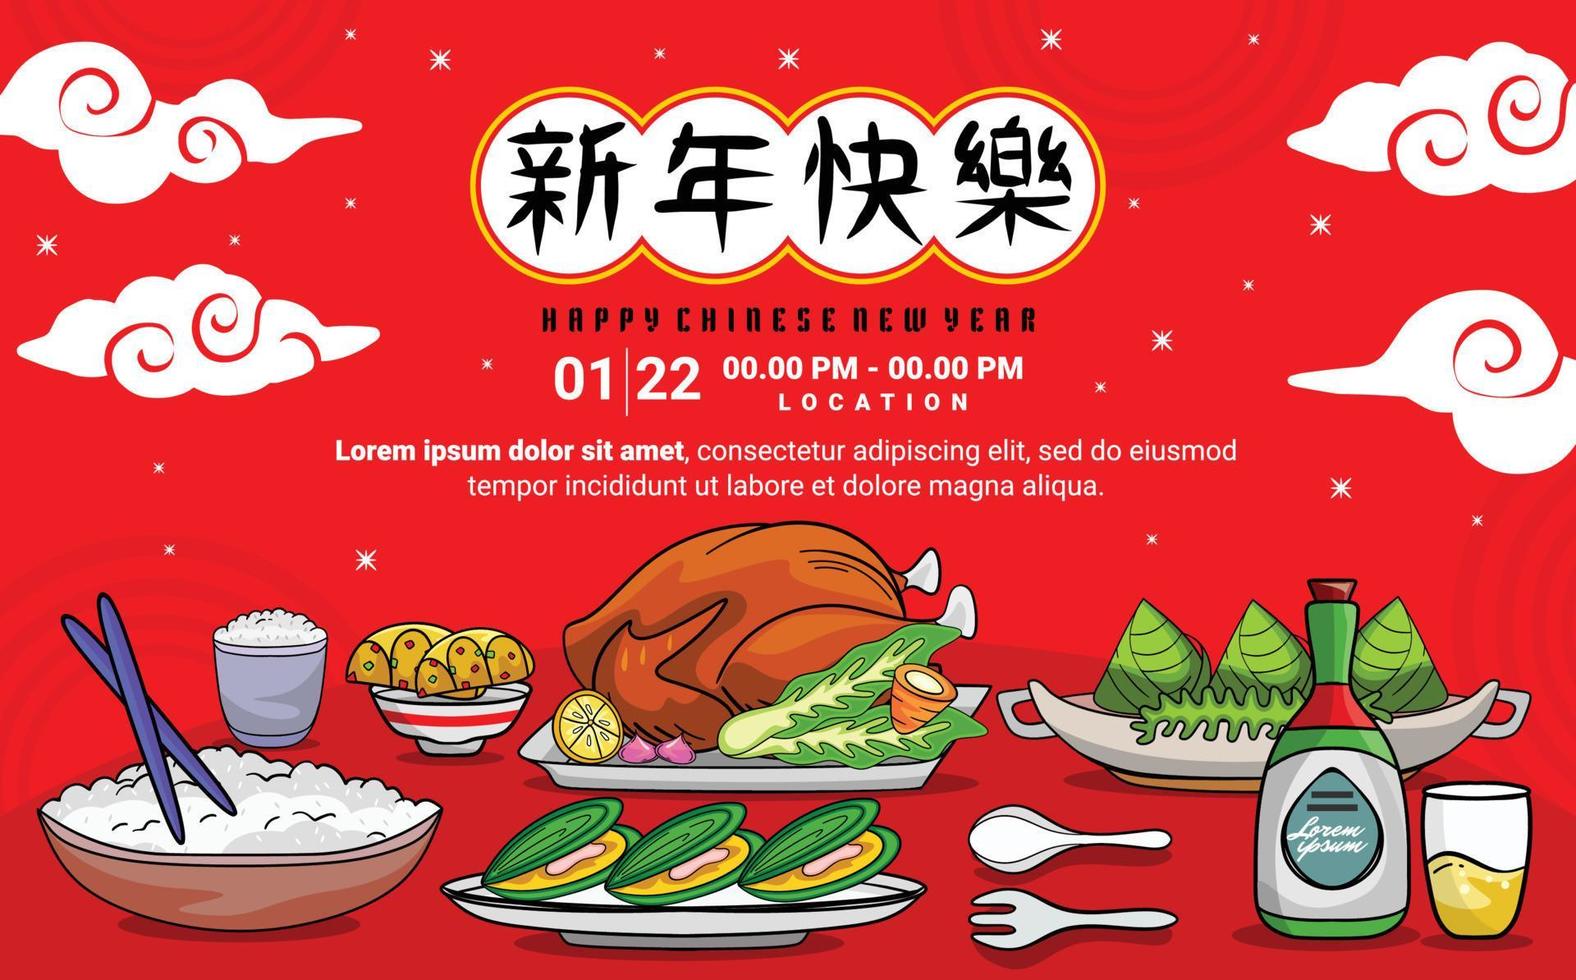 big meal invitation card on chinese new birthday event vector